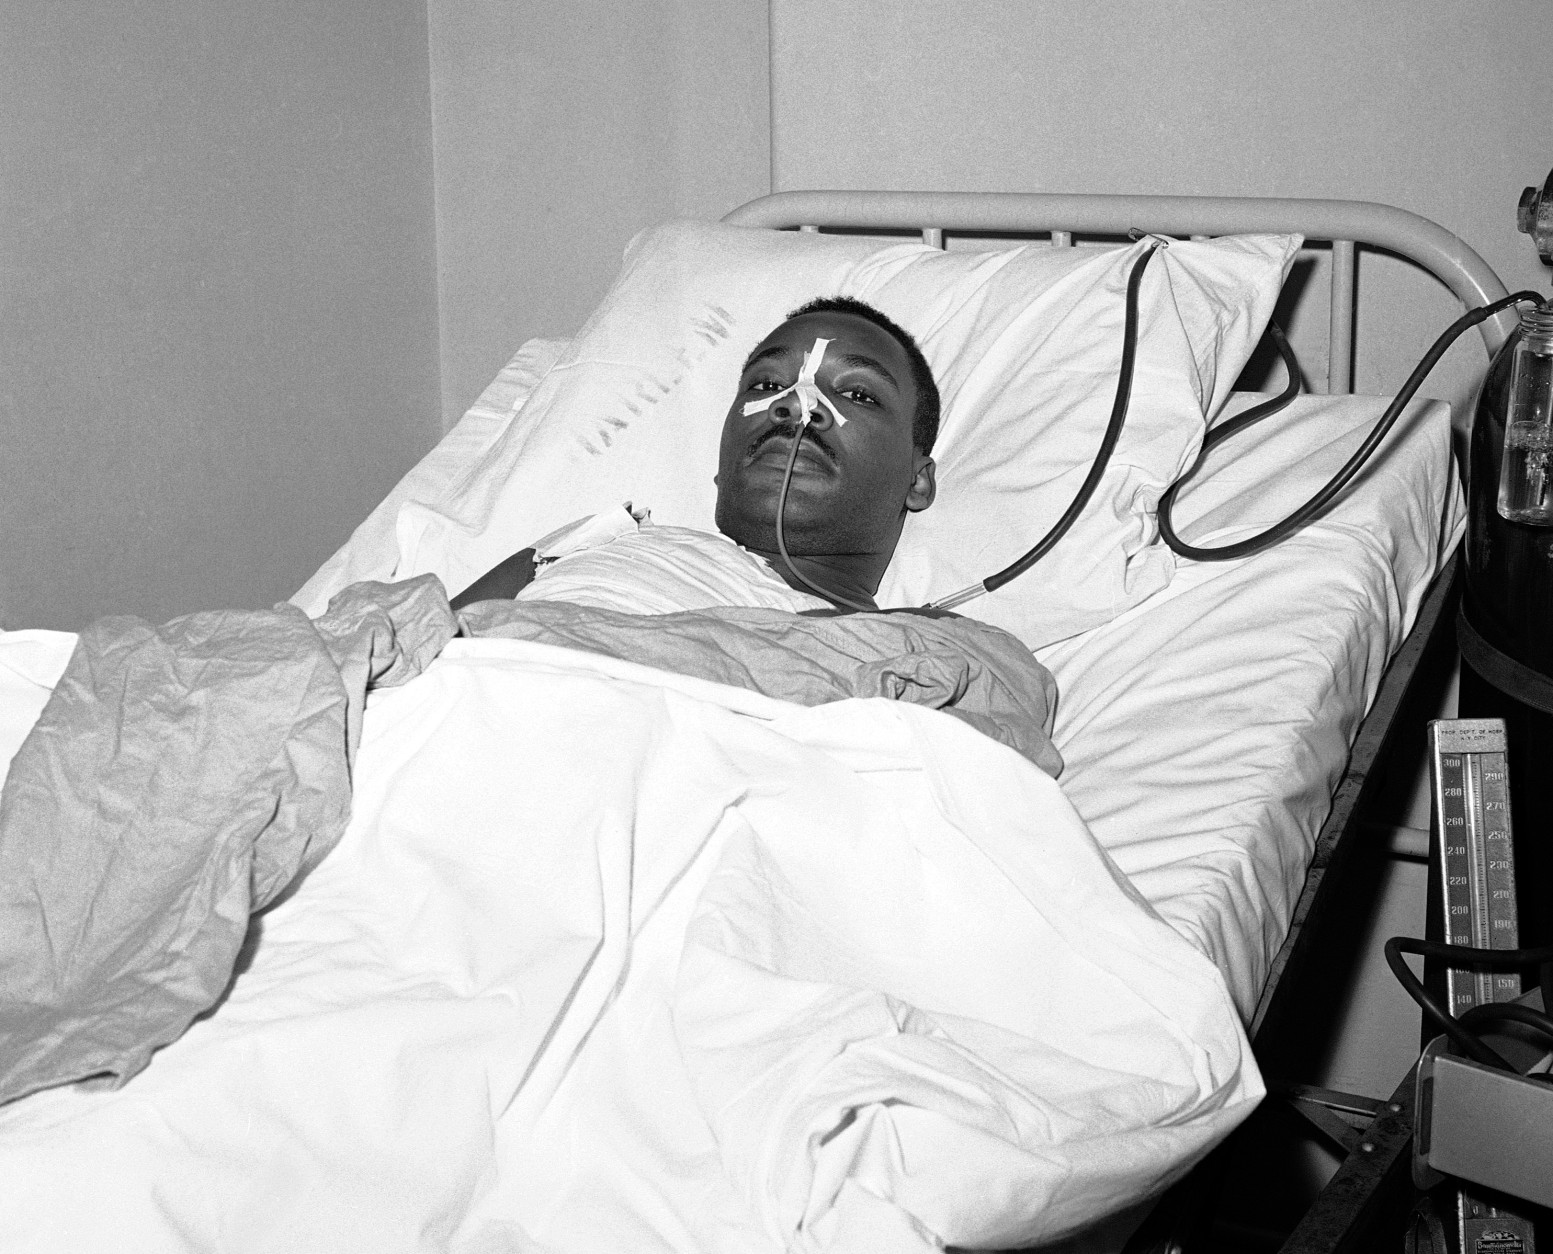 Martin Luther King Jr. recovers from surgery in bed at New York's Harlem Hospital on following an operation to remove steel letter opener from his chest after being stabbed by a mentally disturbed woman as he signed books in Harlem. The New York City surgeon, Dr. John W.V. Cordice, who was part of the medical team that saved King the nearly fatal stab wound has died at the age of 95. The death was announced Tuesday, Dec. 31, 2013, by the city agency that oversees Harlem Hospital Center, where Cordice was formerly an attending surgeon and chief of thoracic surgery. (AP Photo/John Lent., File)